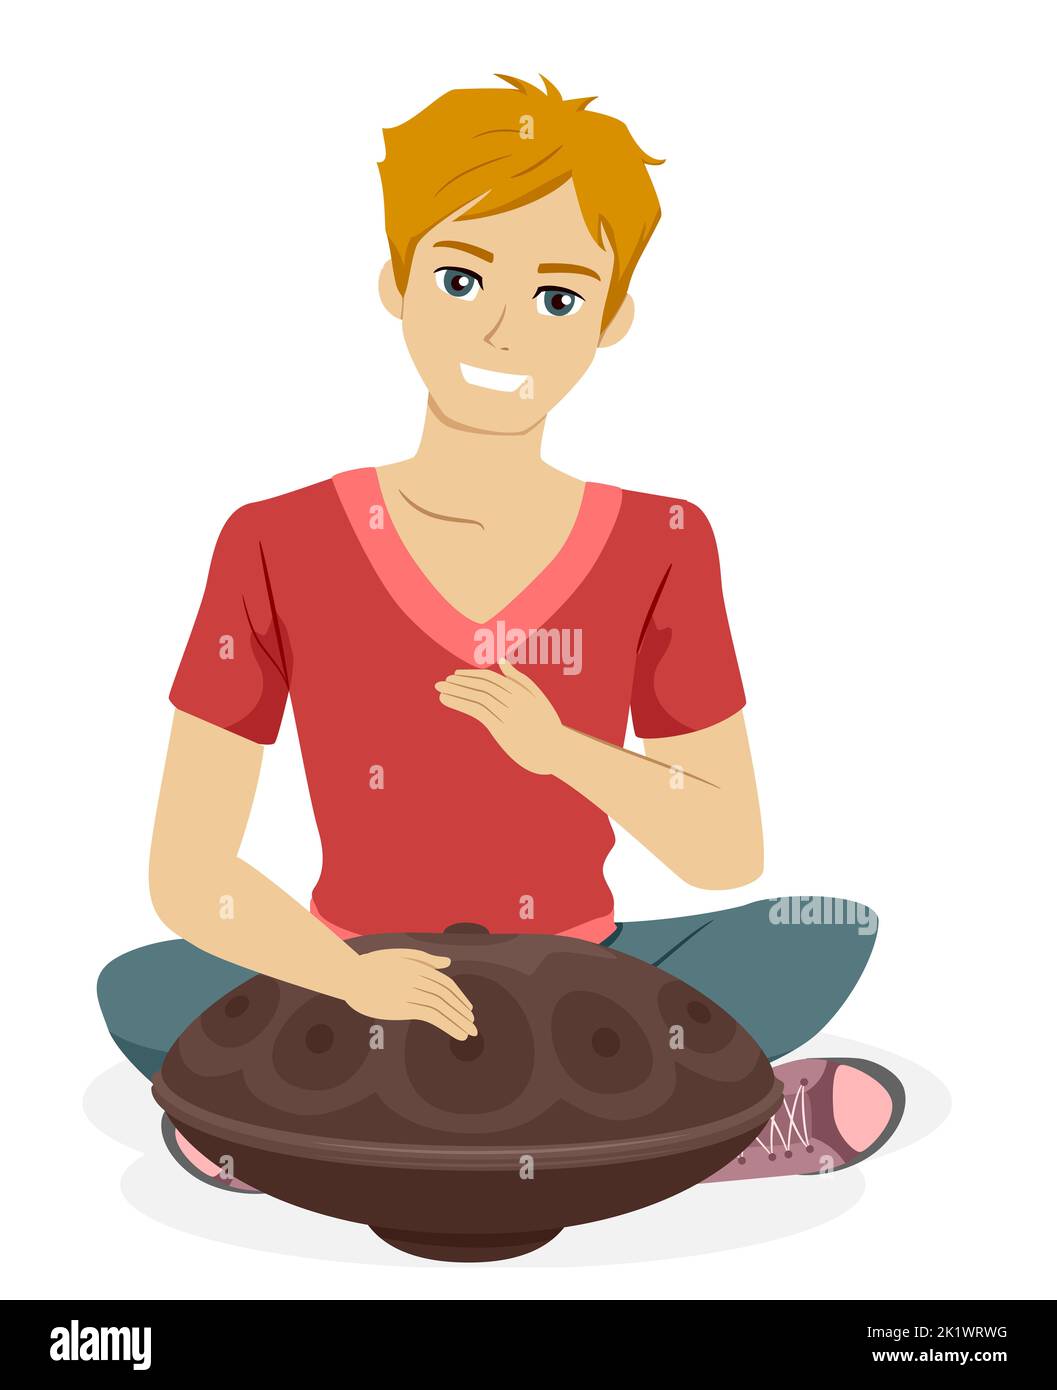 Illustration of Teen Guy Sitting on the Floor while Playing Steel Hand Pan Musical Instrument Stock Photo